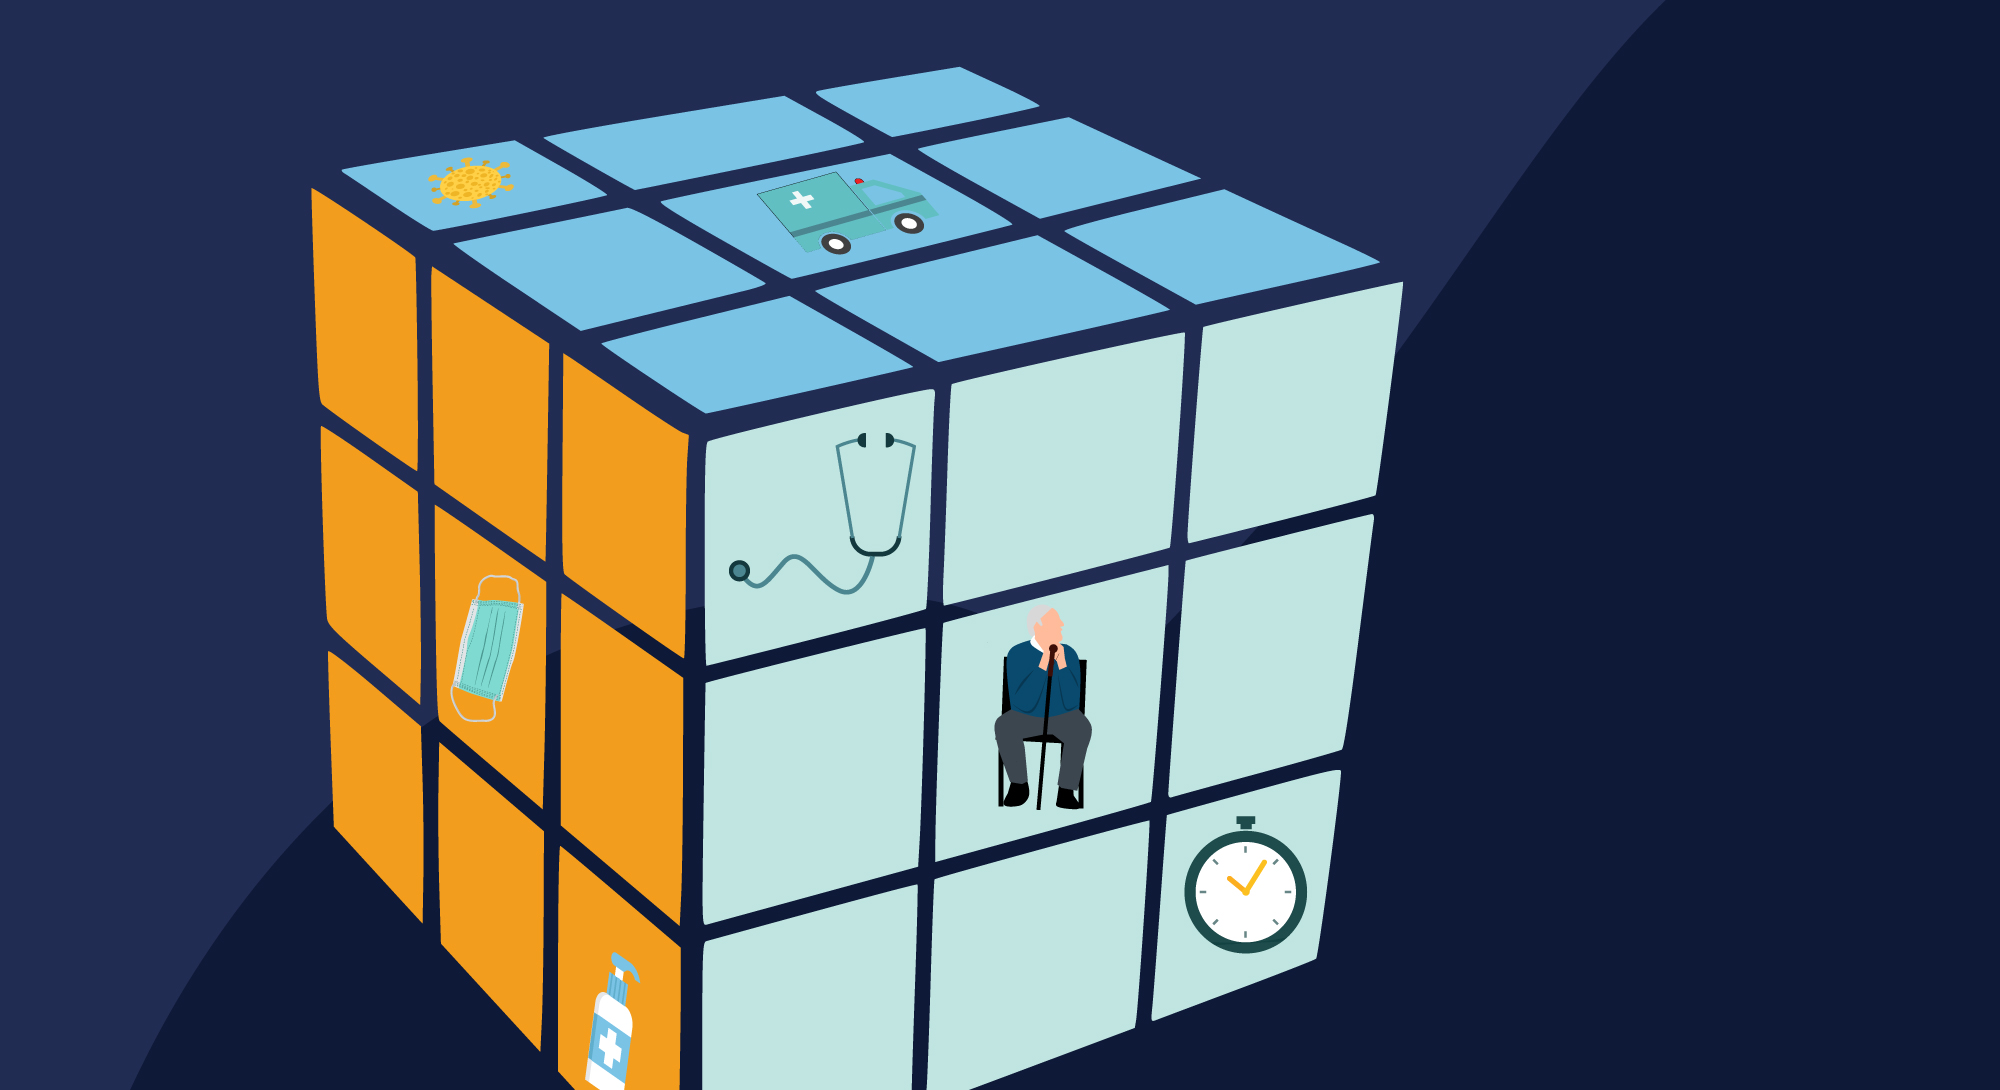 Illustrated rubik's cube with healthcare-related images on individual cubes